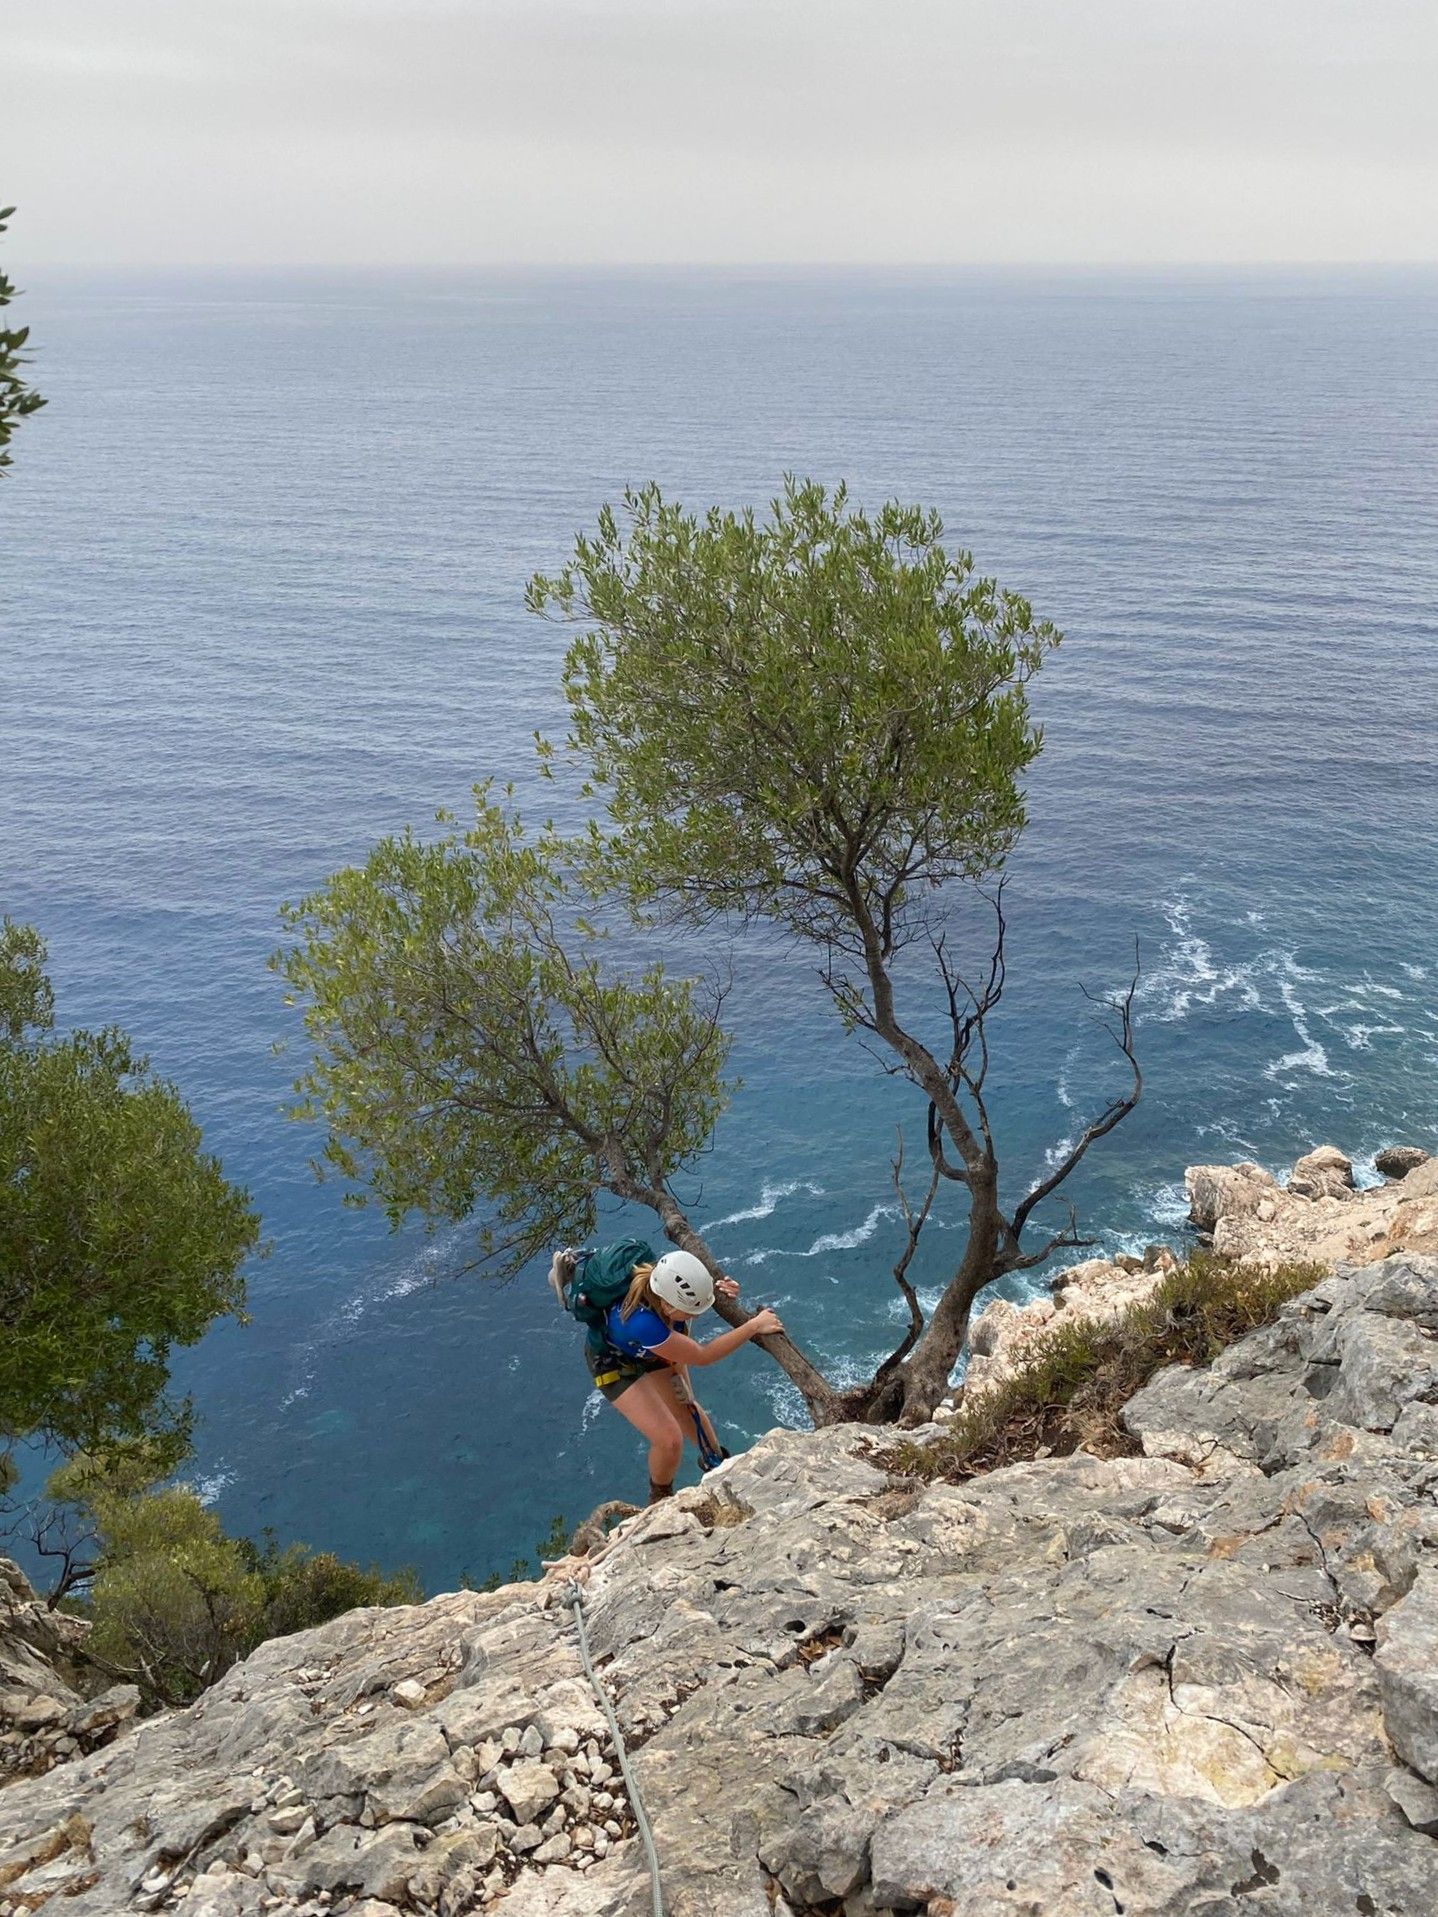 A climber clinging to a tree on the cliff face, with the sea below, Sardinia.